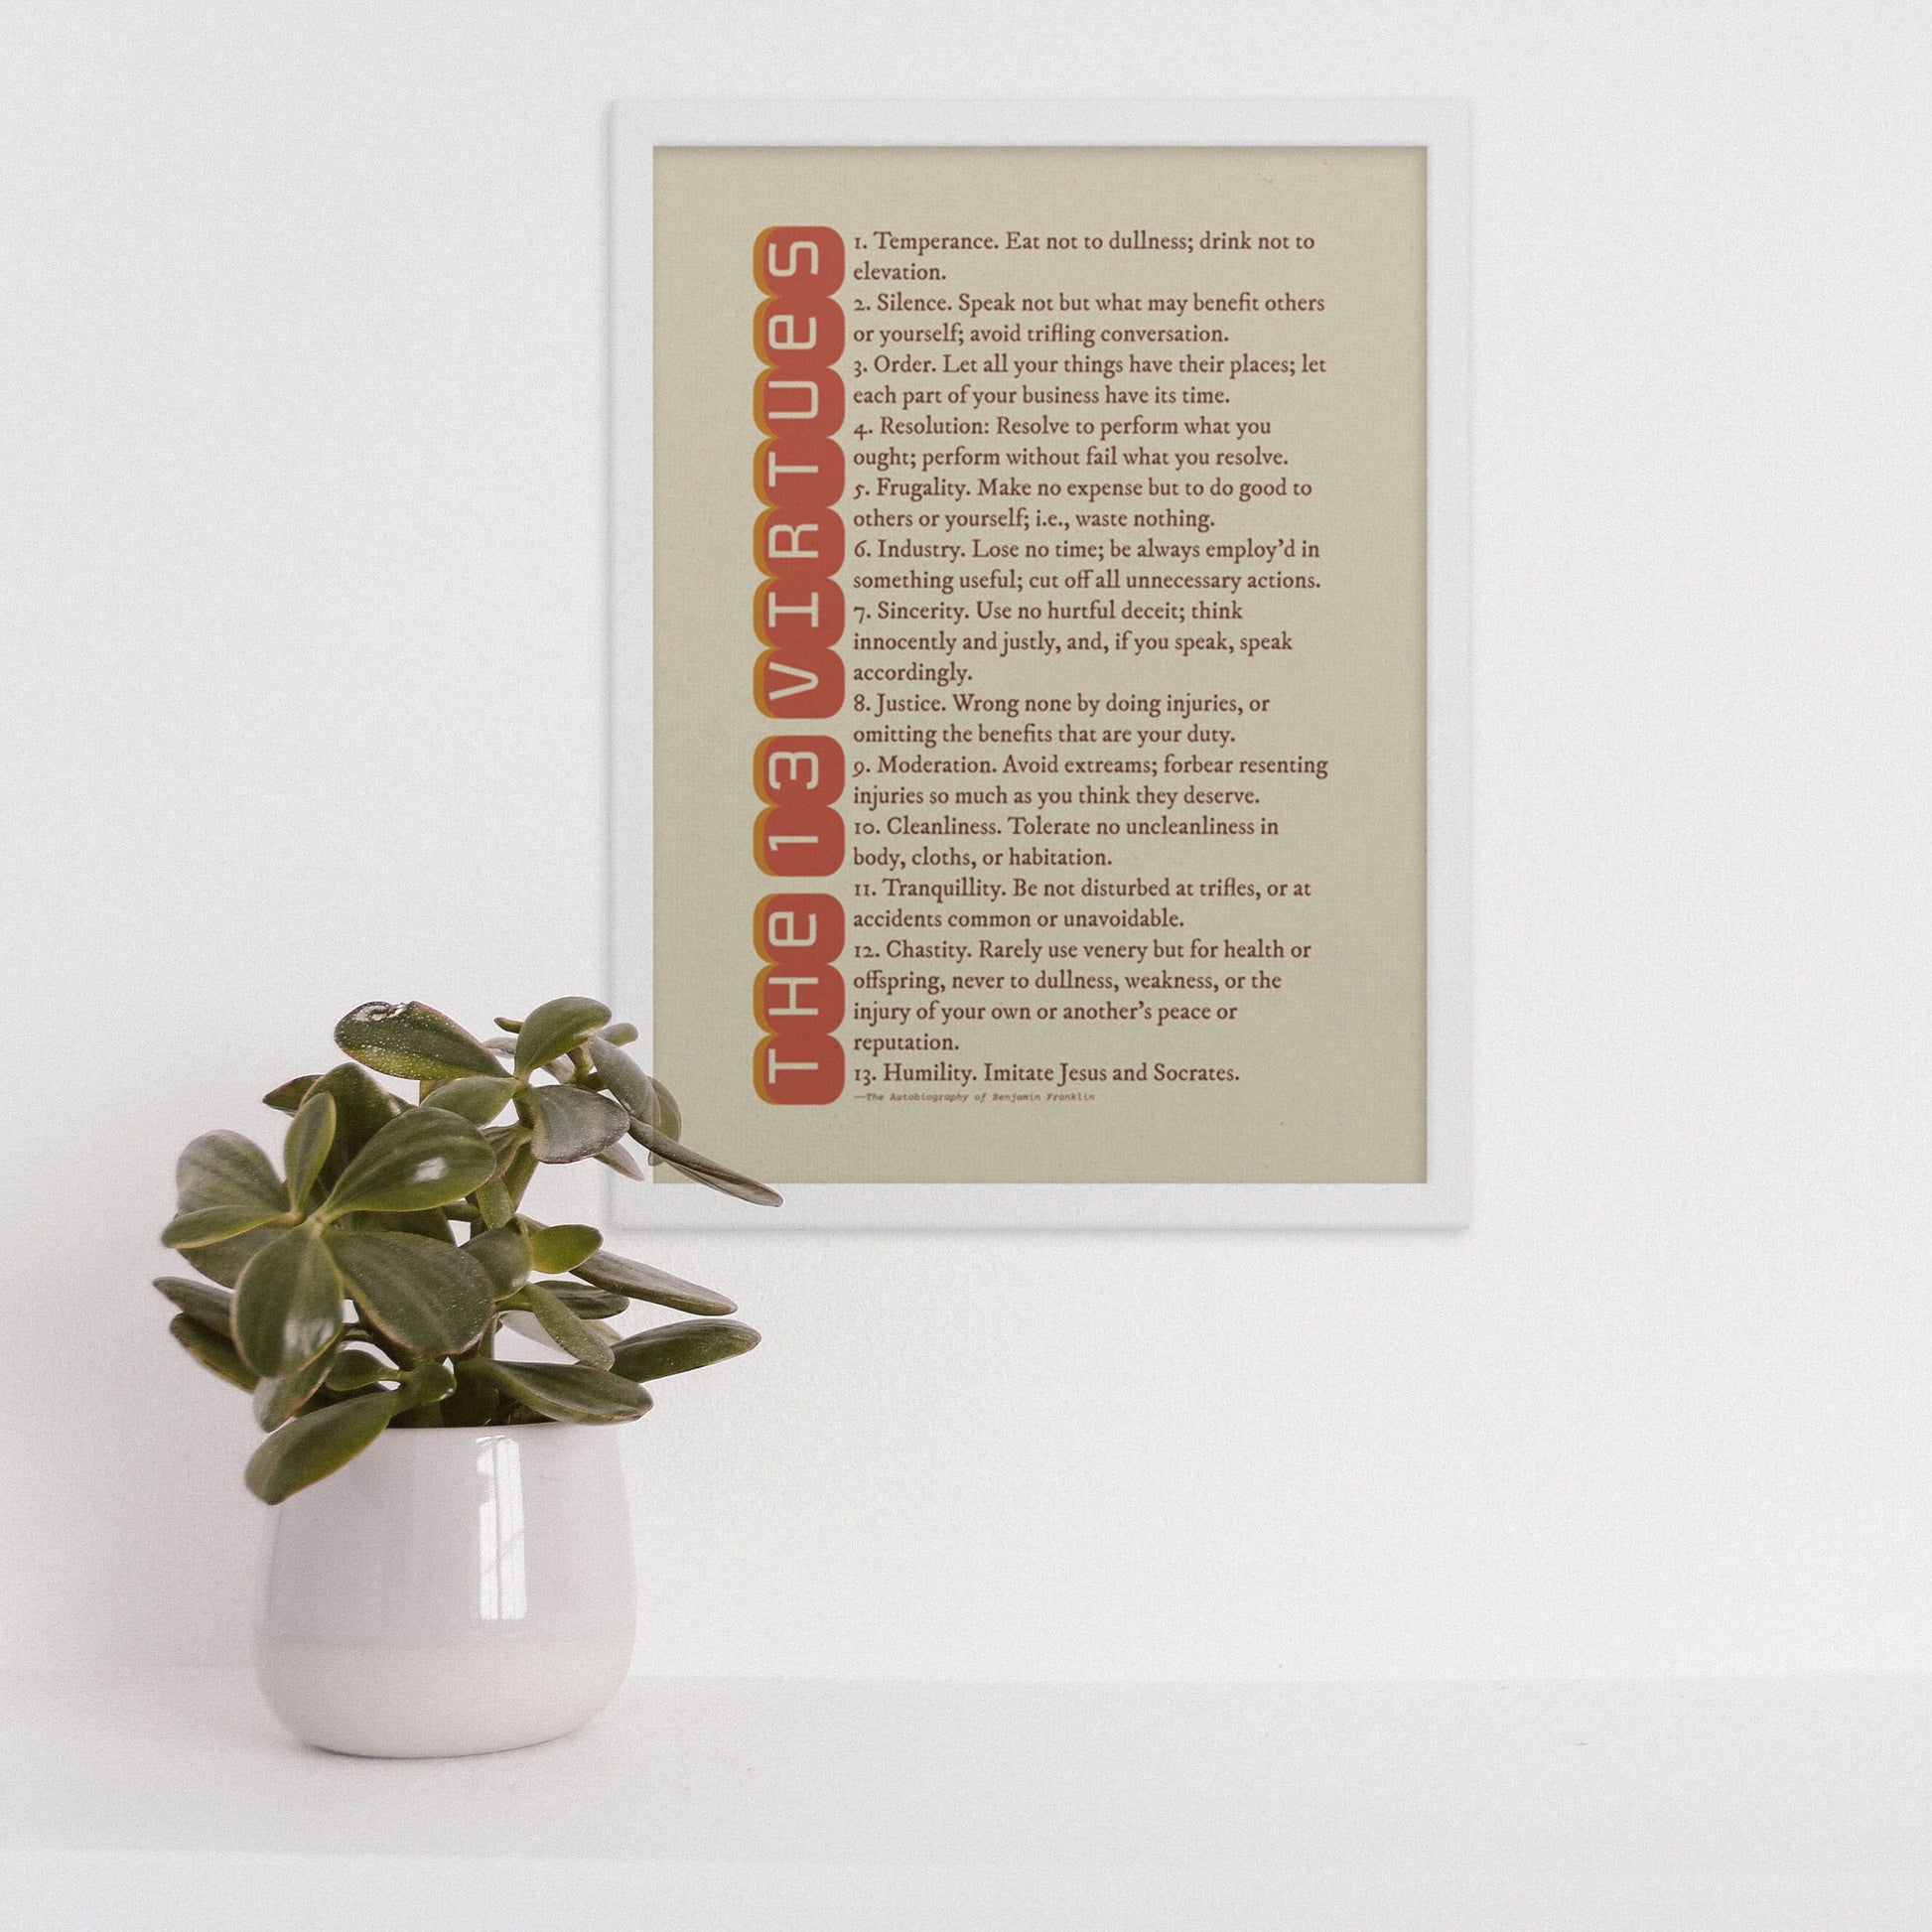 13 Virtues By Benjamin Franklin Poster, Inspirational Poster